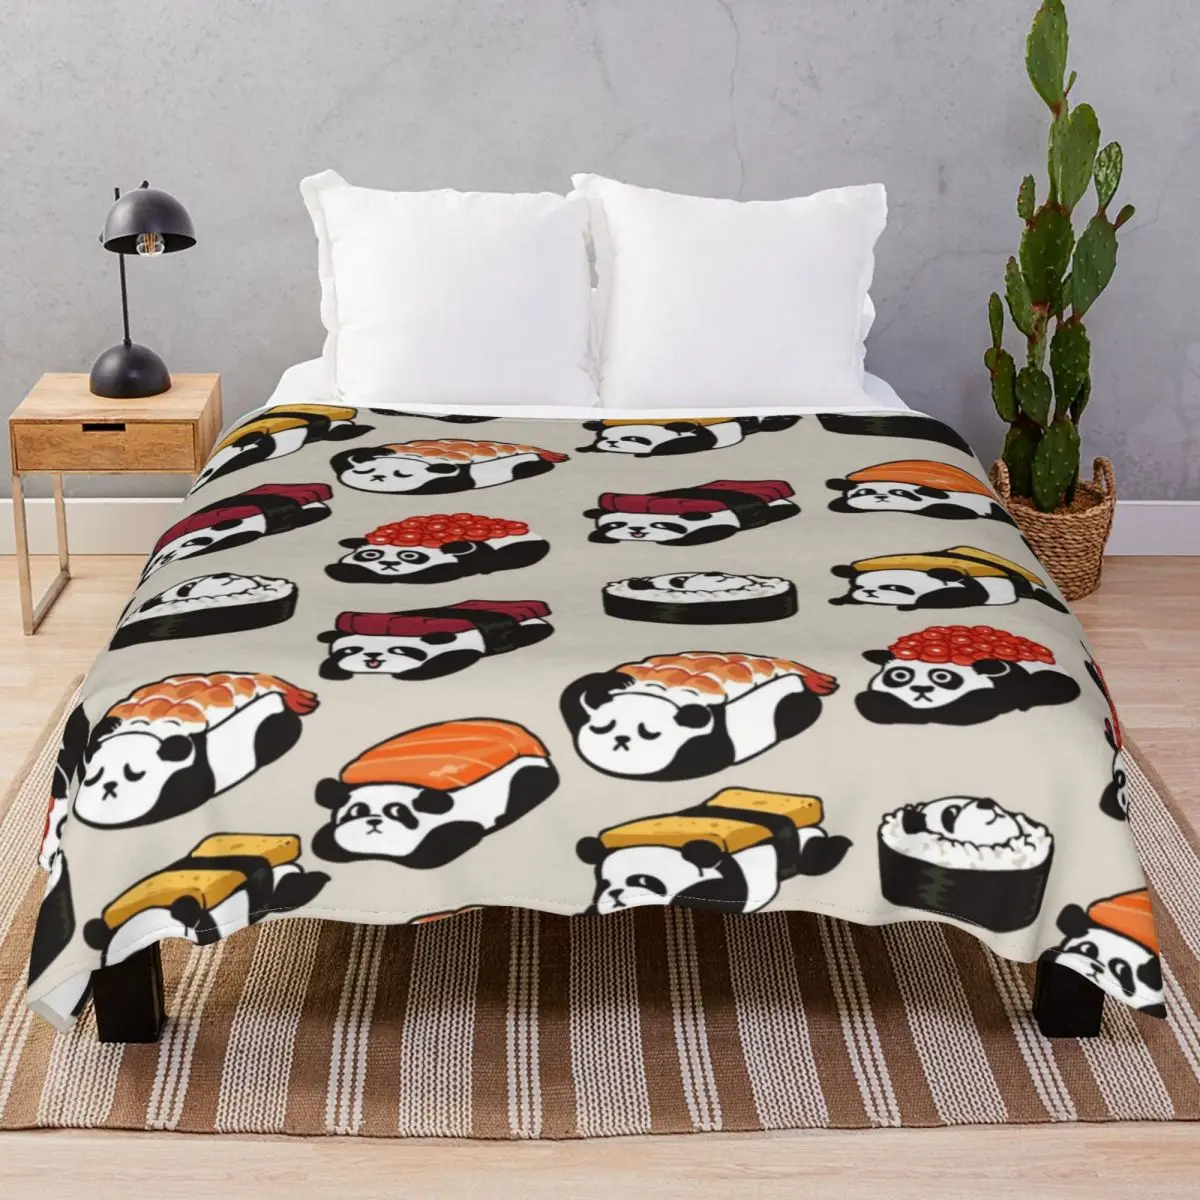 SUSHI PANDA Blanket Flannel Textile Decor Super Soft Throw Blankets for Bedding Home Couch Camp Cinema